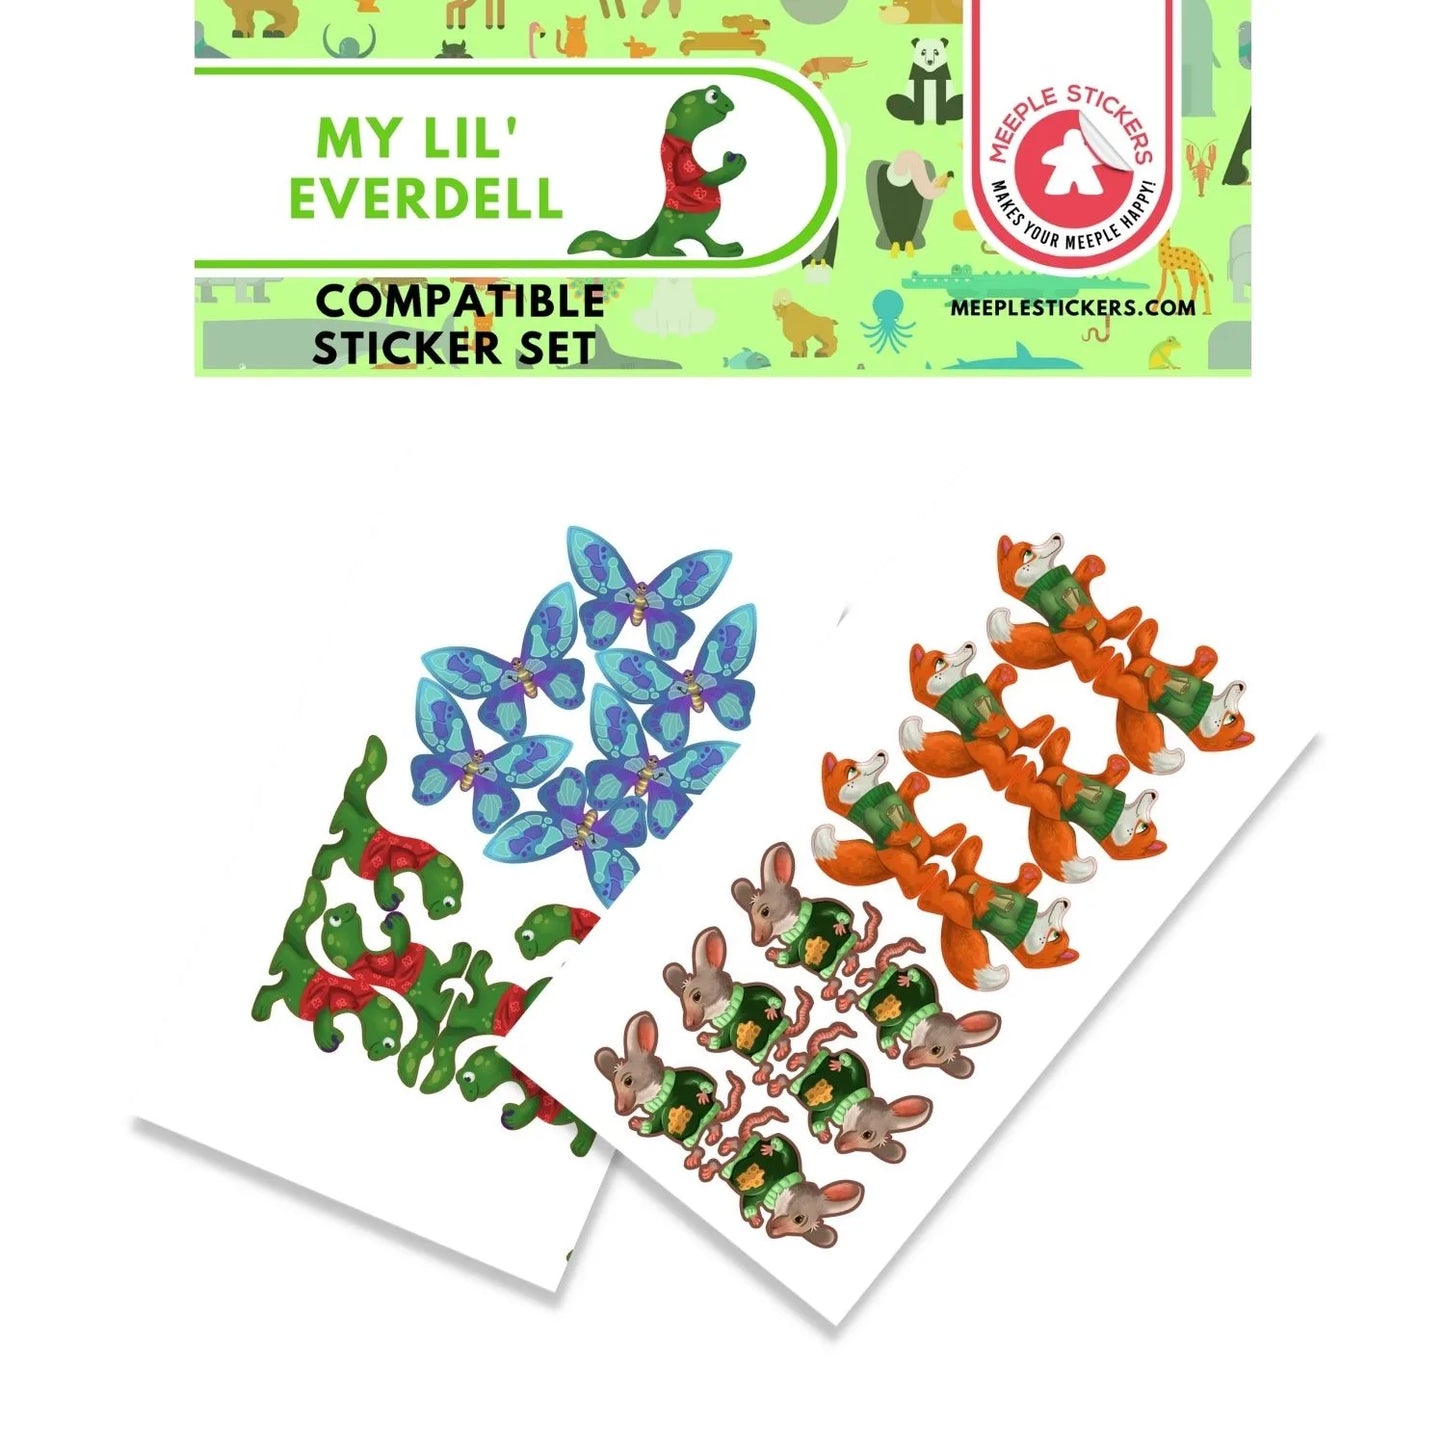 MeepleStickers My Lil' Everdell Sticker Pack Upgrades